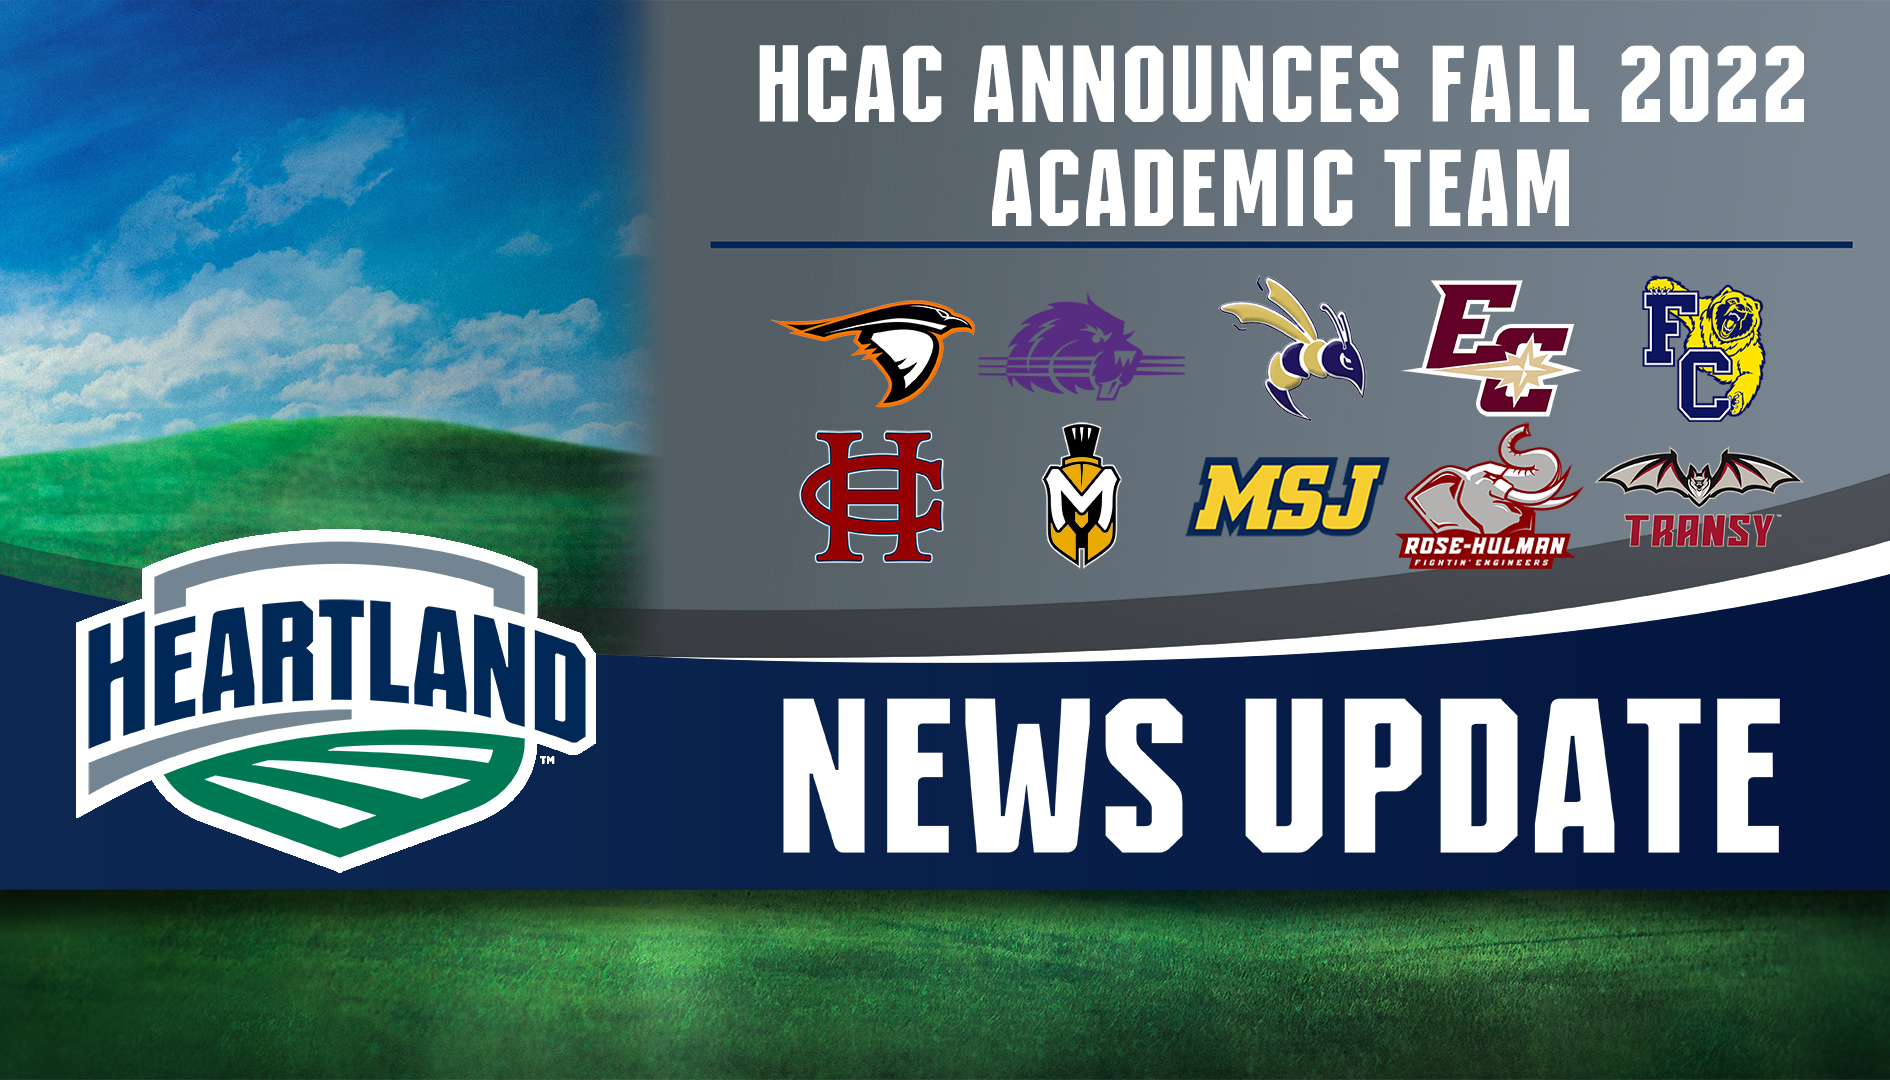 Anderson Records 15 Academic All-HCAC Selections for Winter 2022-23 Season